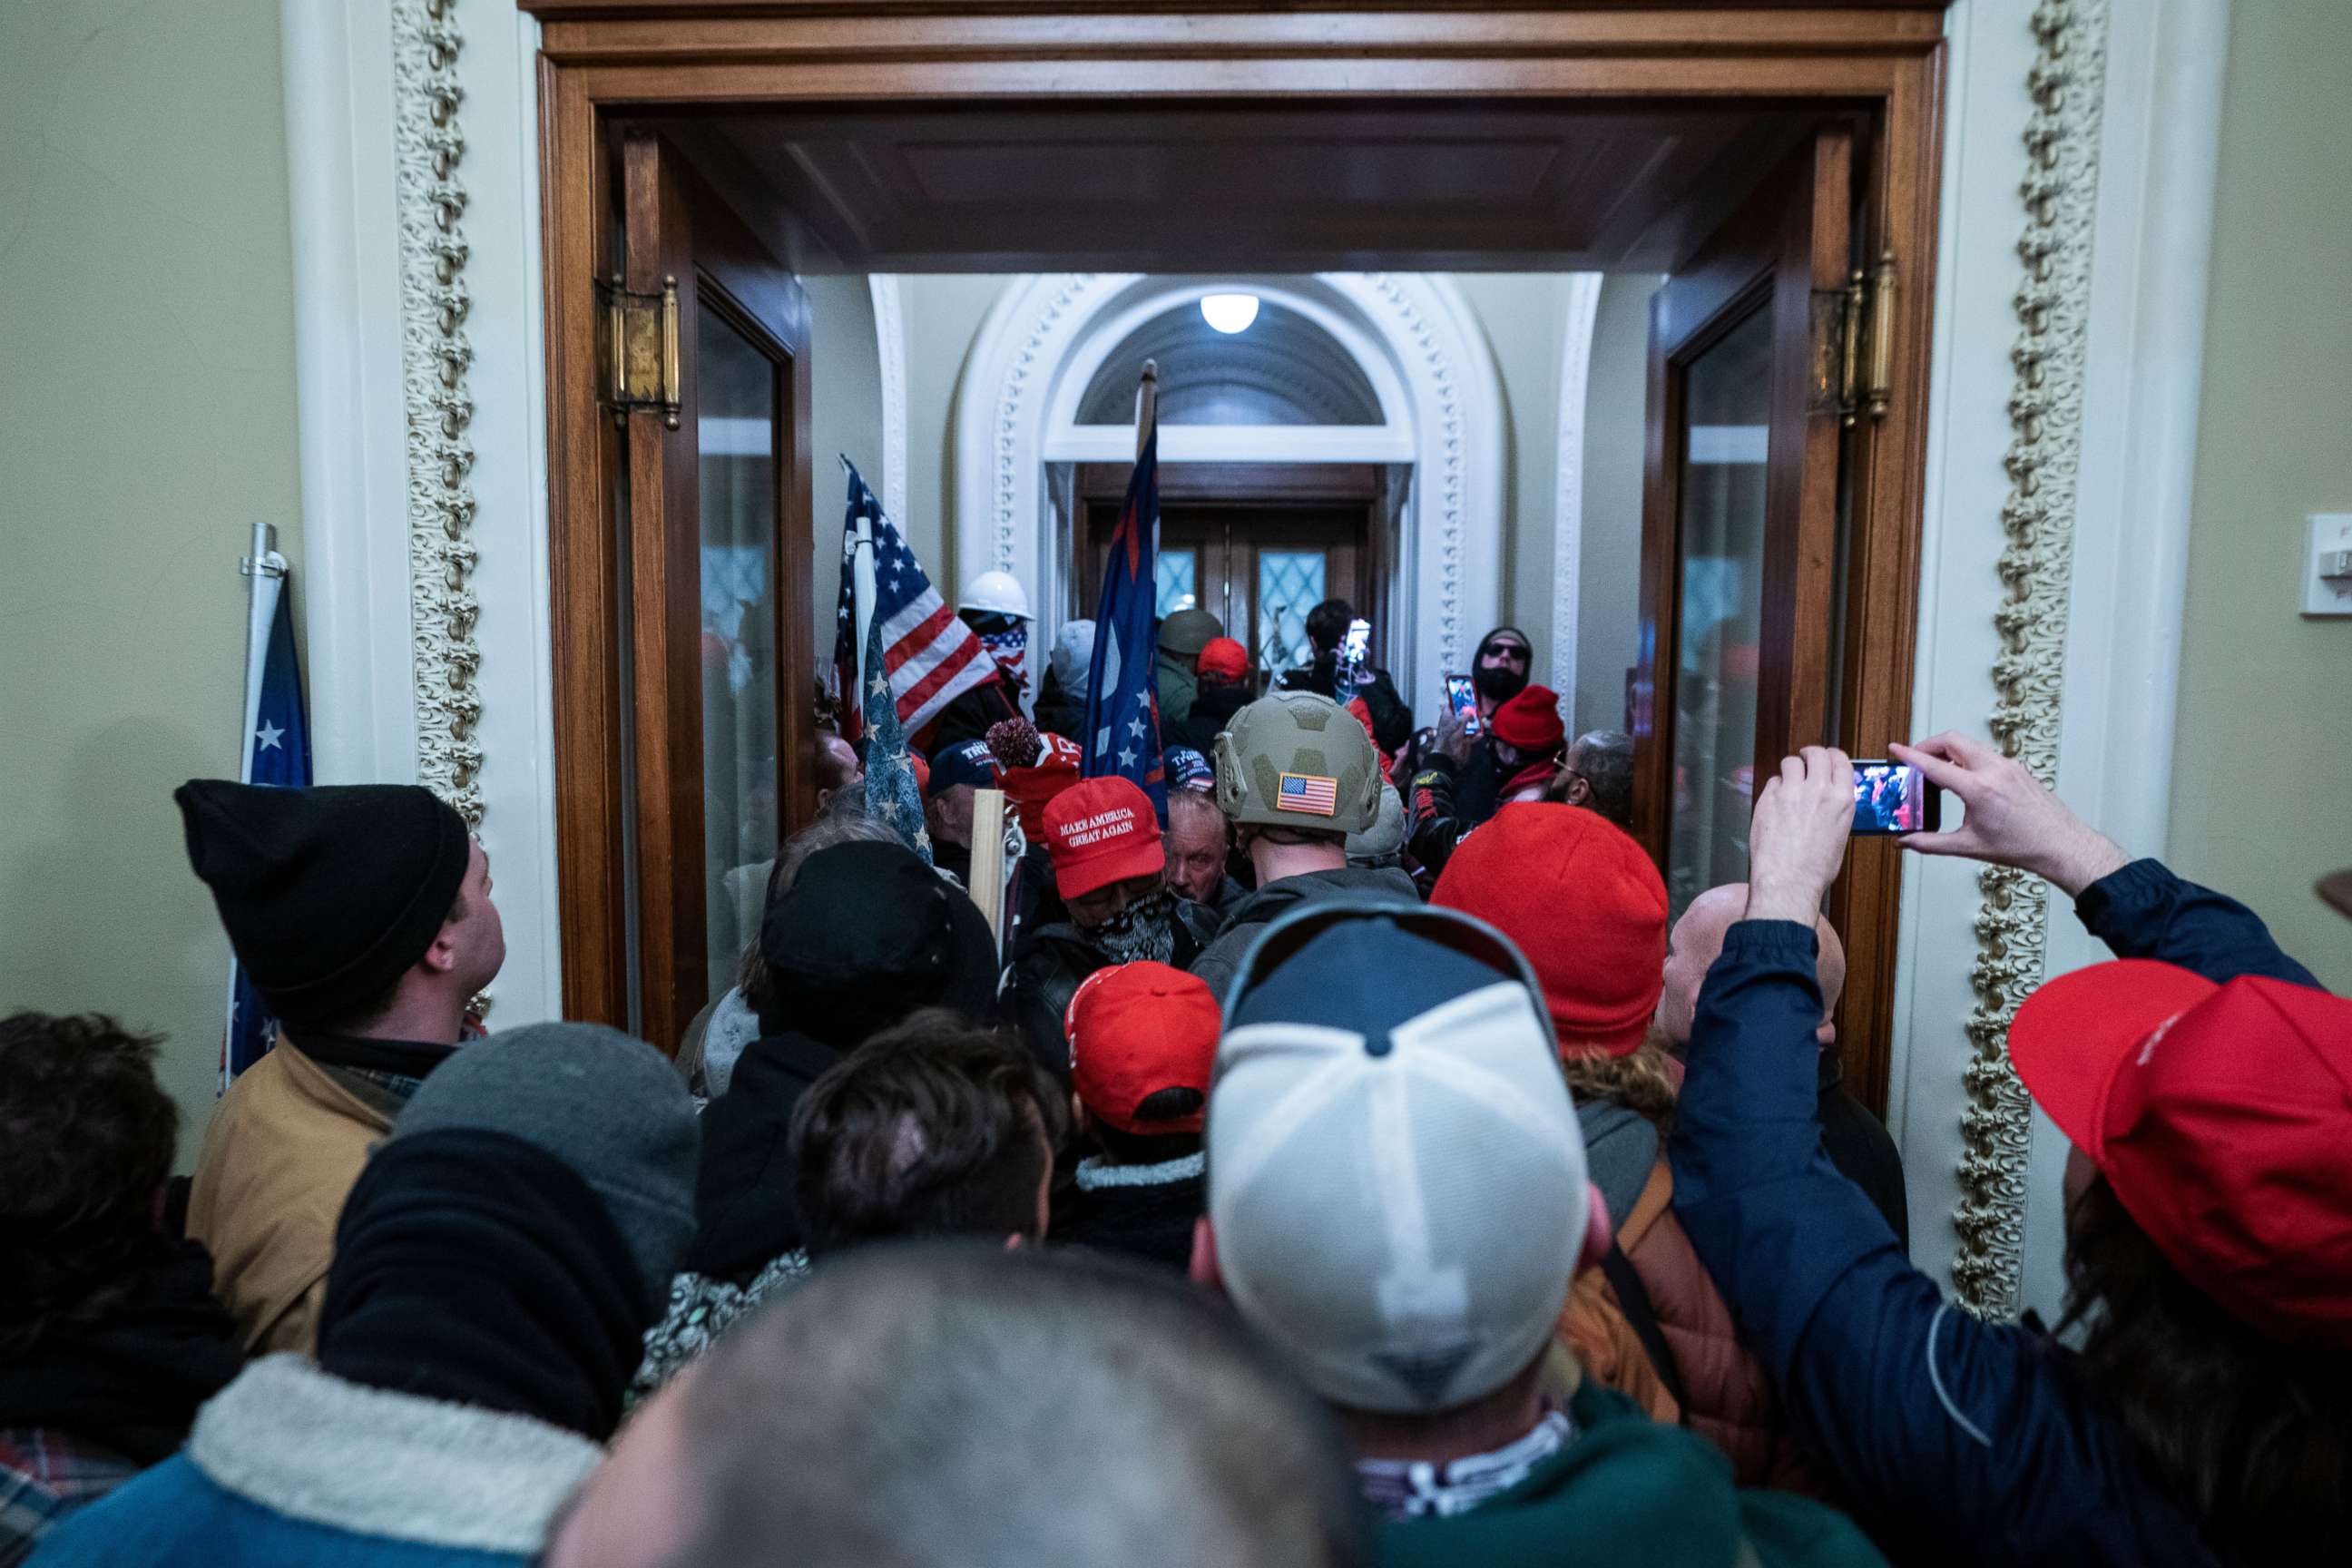 PHOTO: Supporters of President Donald Trump press through the door to the House chamber after breaching Capitol security in Washington, D.C., Jan. 6, 2021.